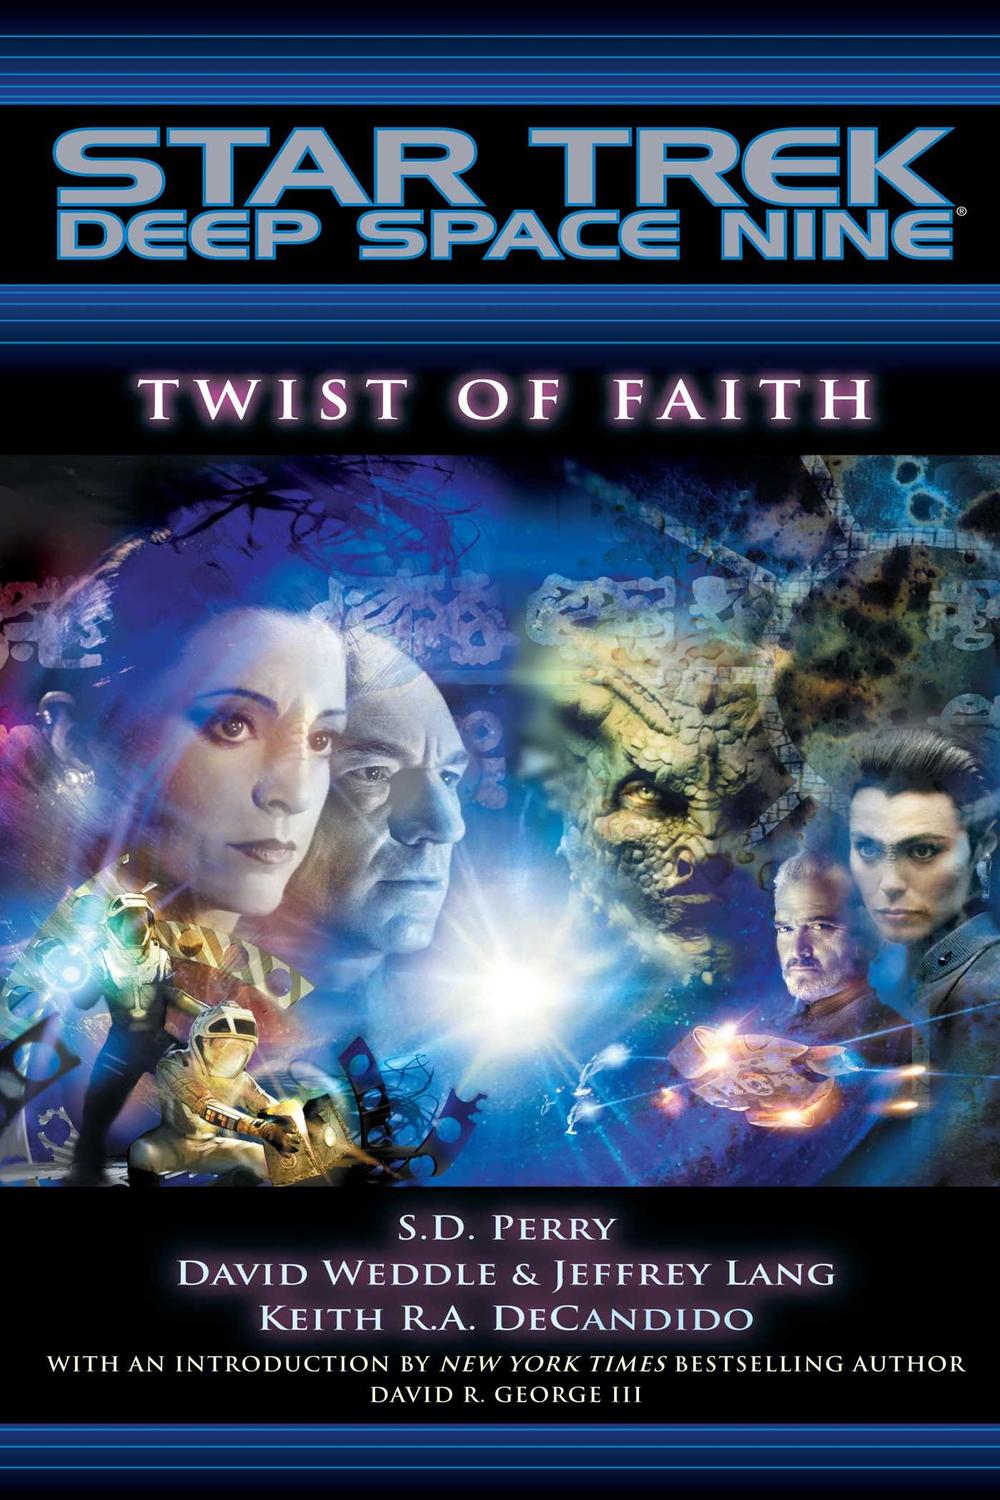 Twist of Faith - S.D. Perry, Weddle David, Jeffrey Lang, Keith R. A. DeCandido